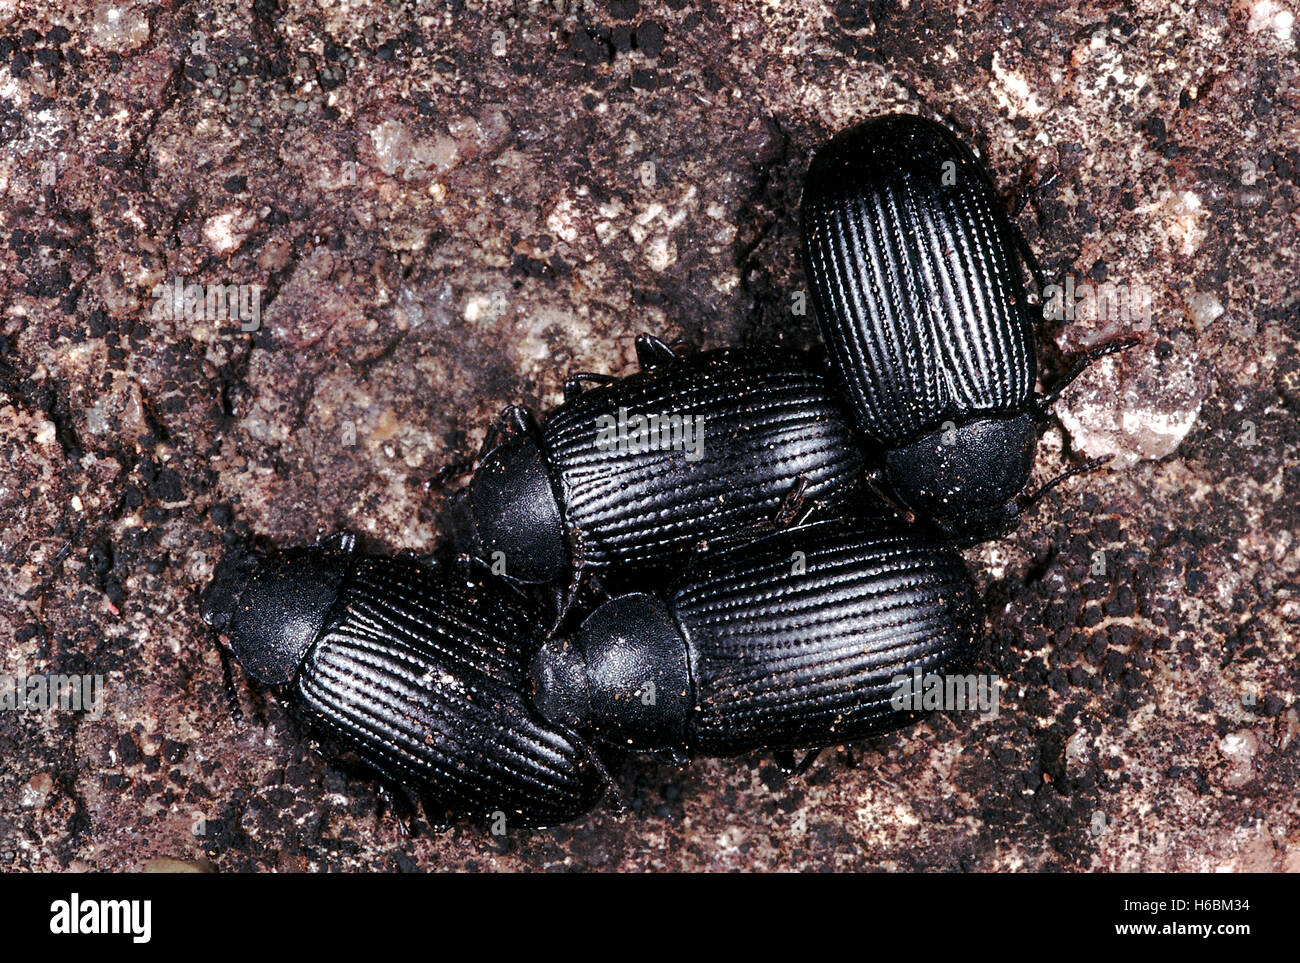 Darkling beetles. These are small beetles usually found under rocks in barren rocky areas. Stock Photo